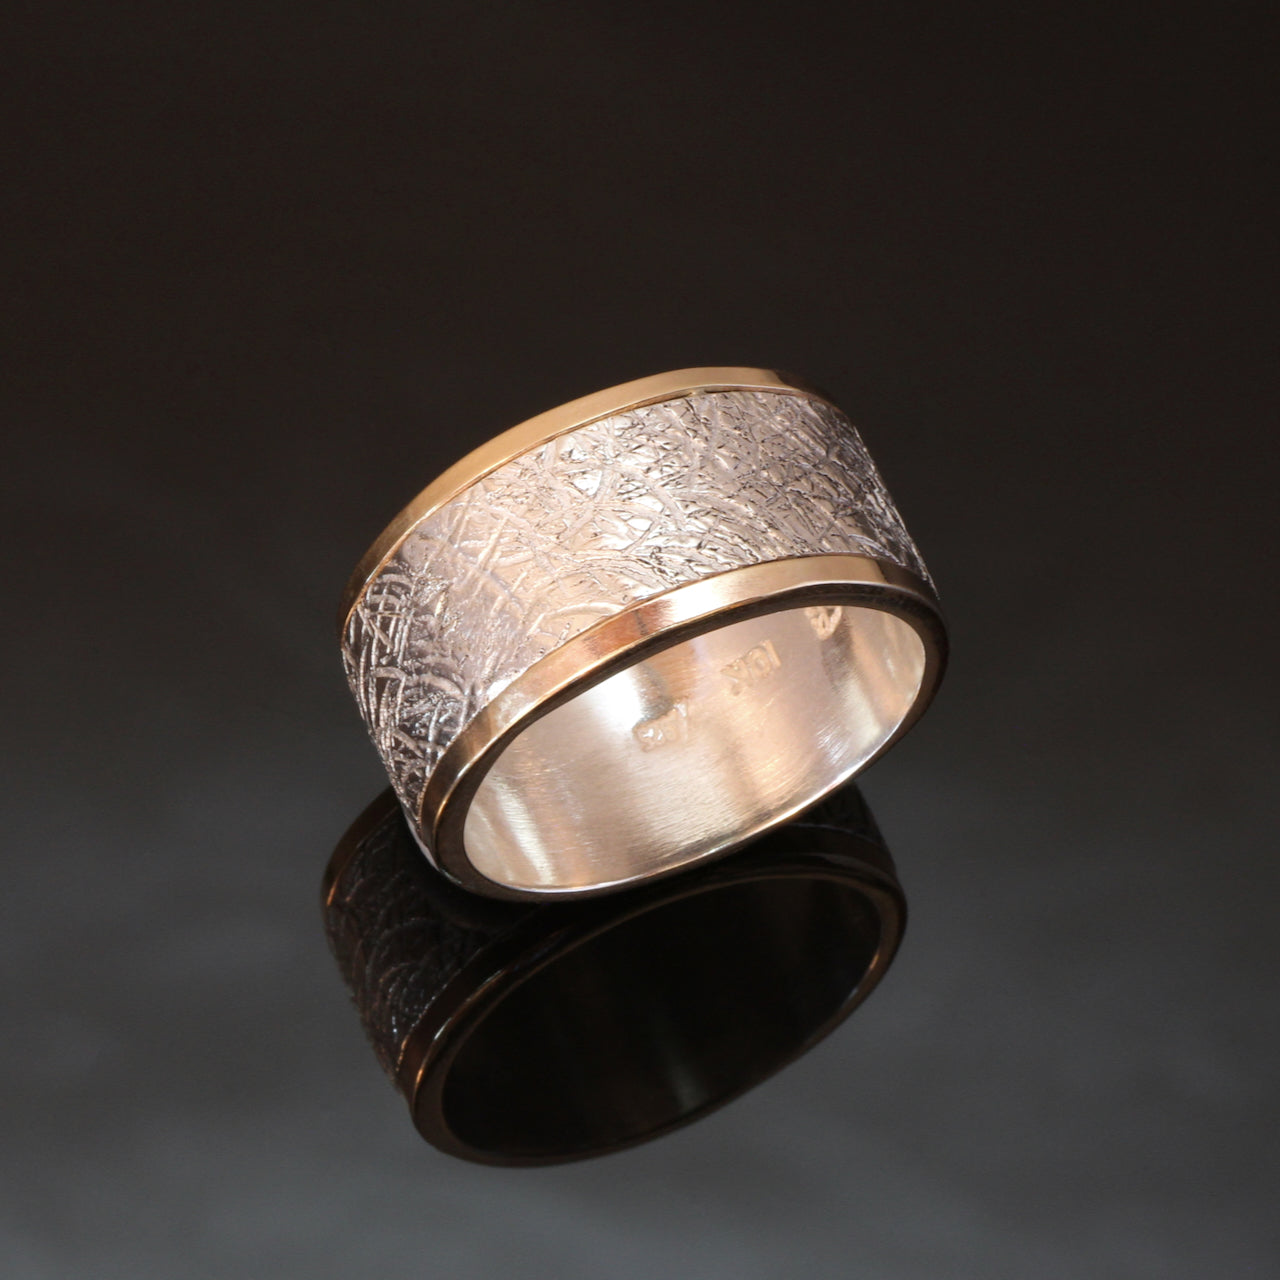 Hammered Silver Gold Ring 8mm, 9mm, 10mm / R217